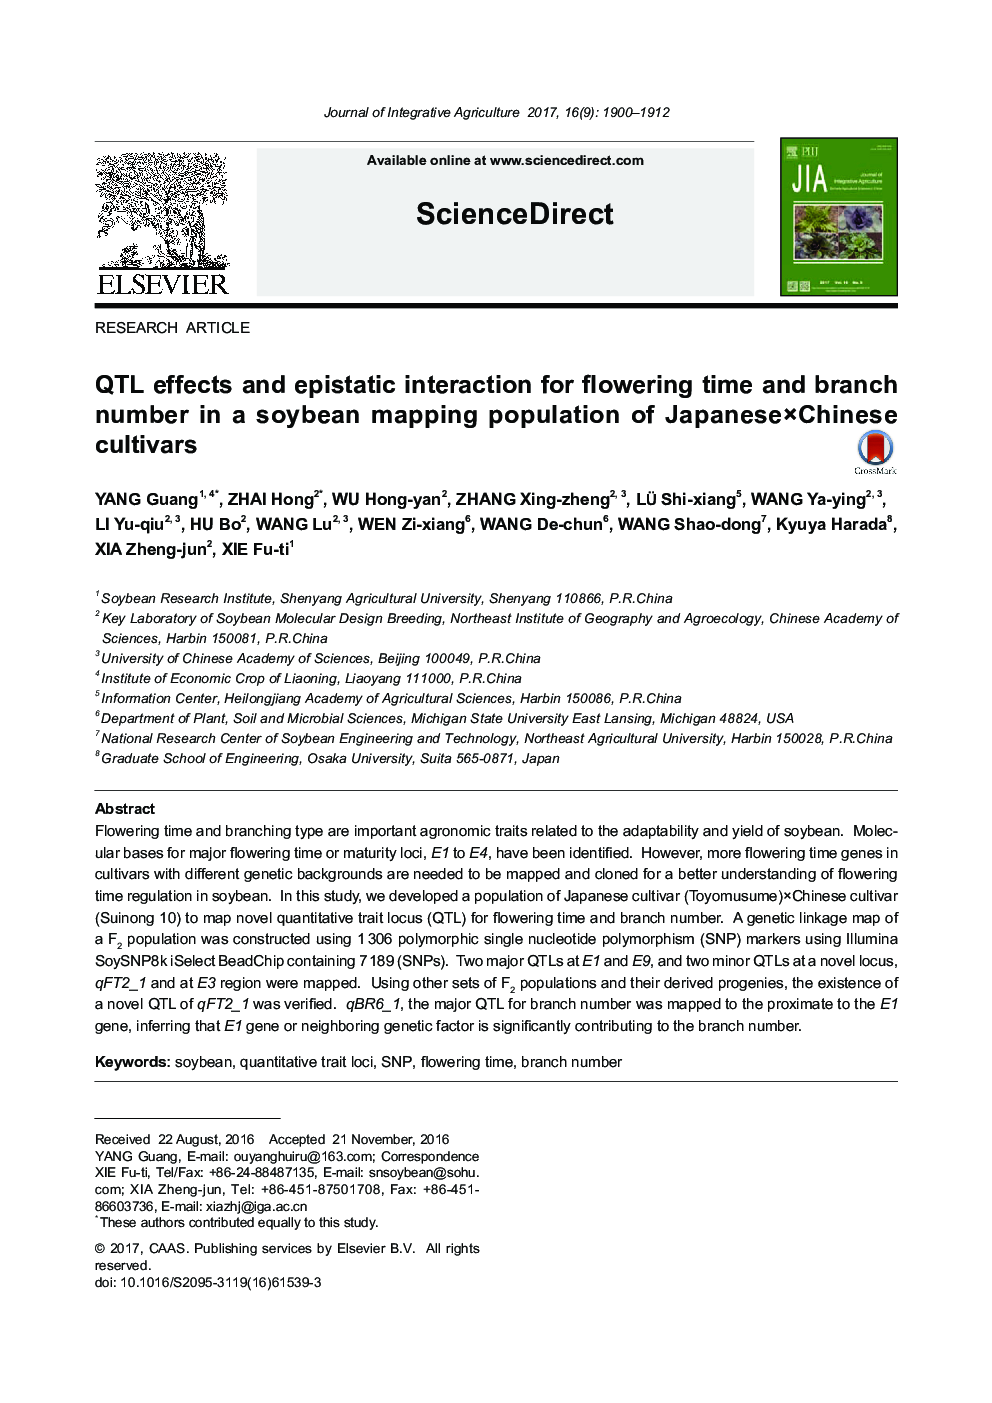 QTL effects and epistatic interaction for flowering time and branch number in a soybean mapping population of JapaneseÃChinese cultivars